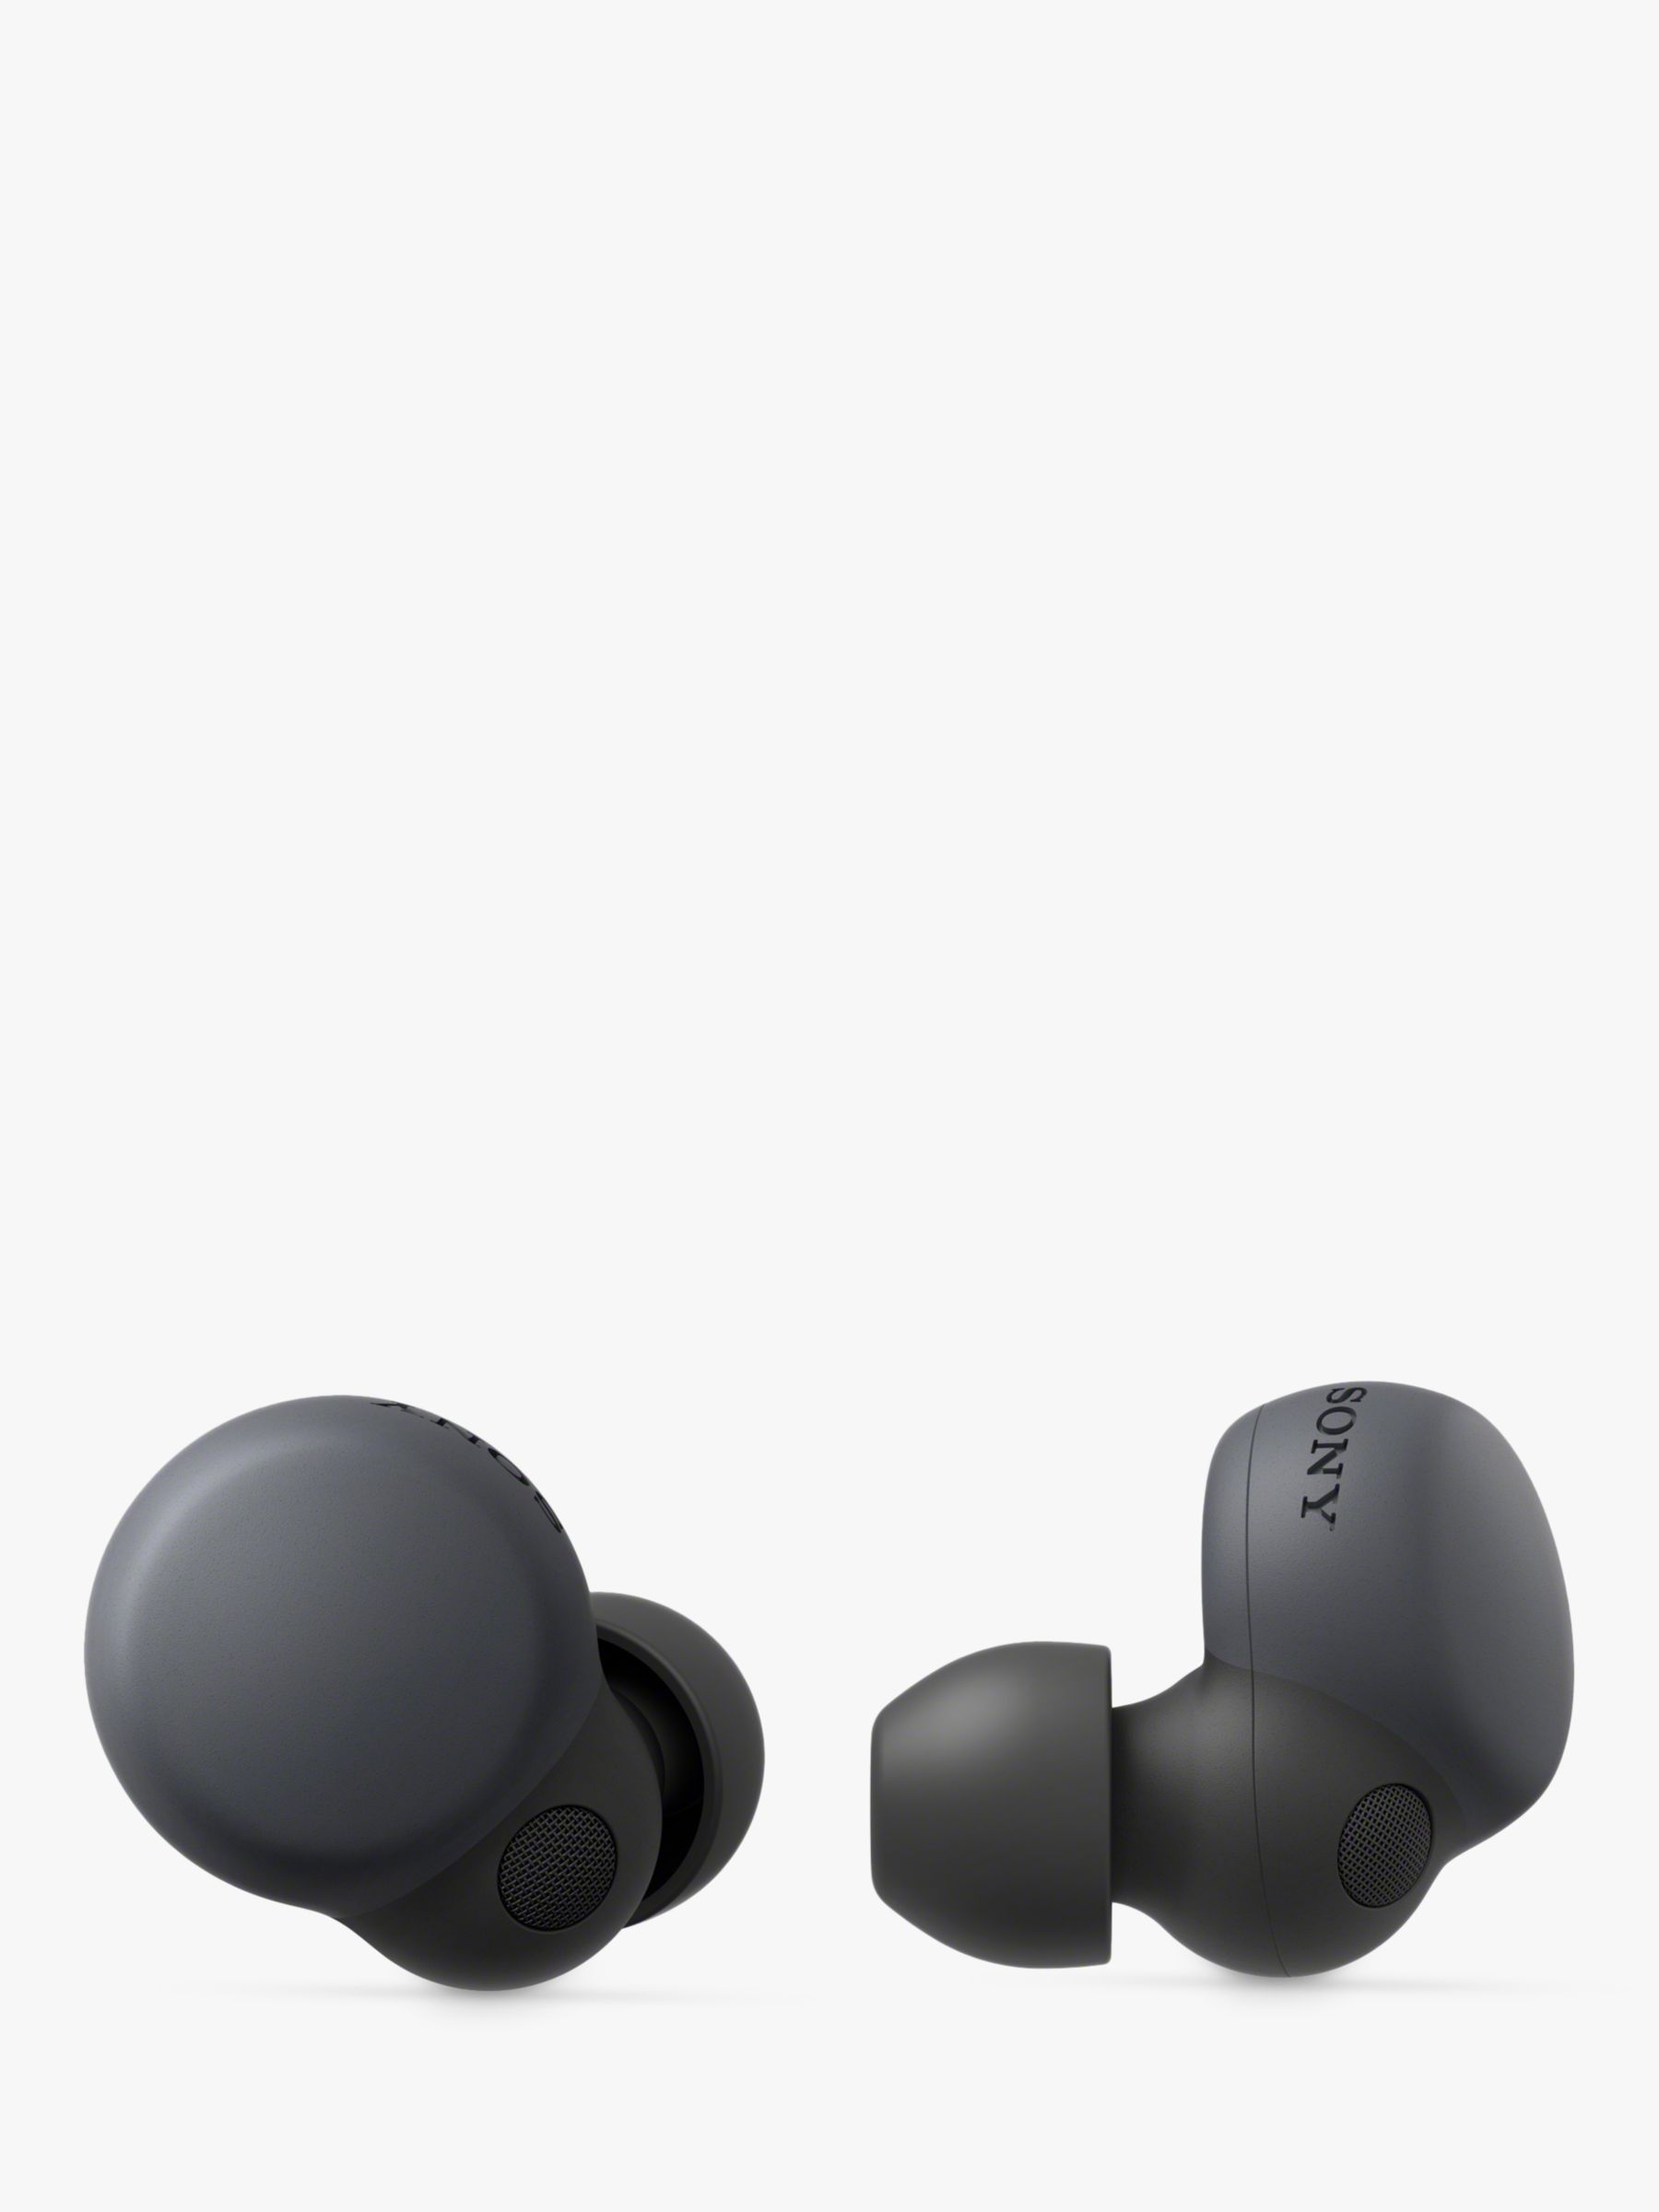  Sony WF-1000XM3 Truly Wireless Noise Cancelling Headphones with  Mic, up to 32 Hours Battery Life, Stable Bluetooth Connection, Wearing  Detection with Alexa Built-in - Black : Electronics